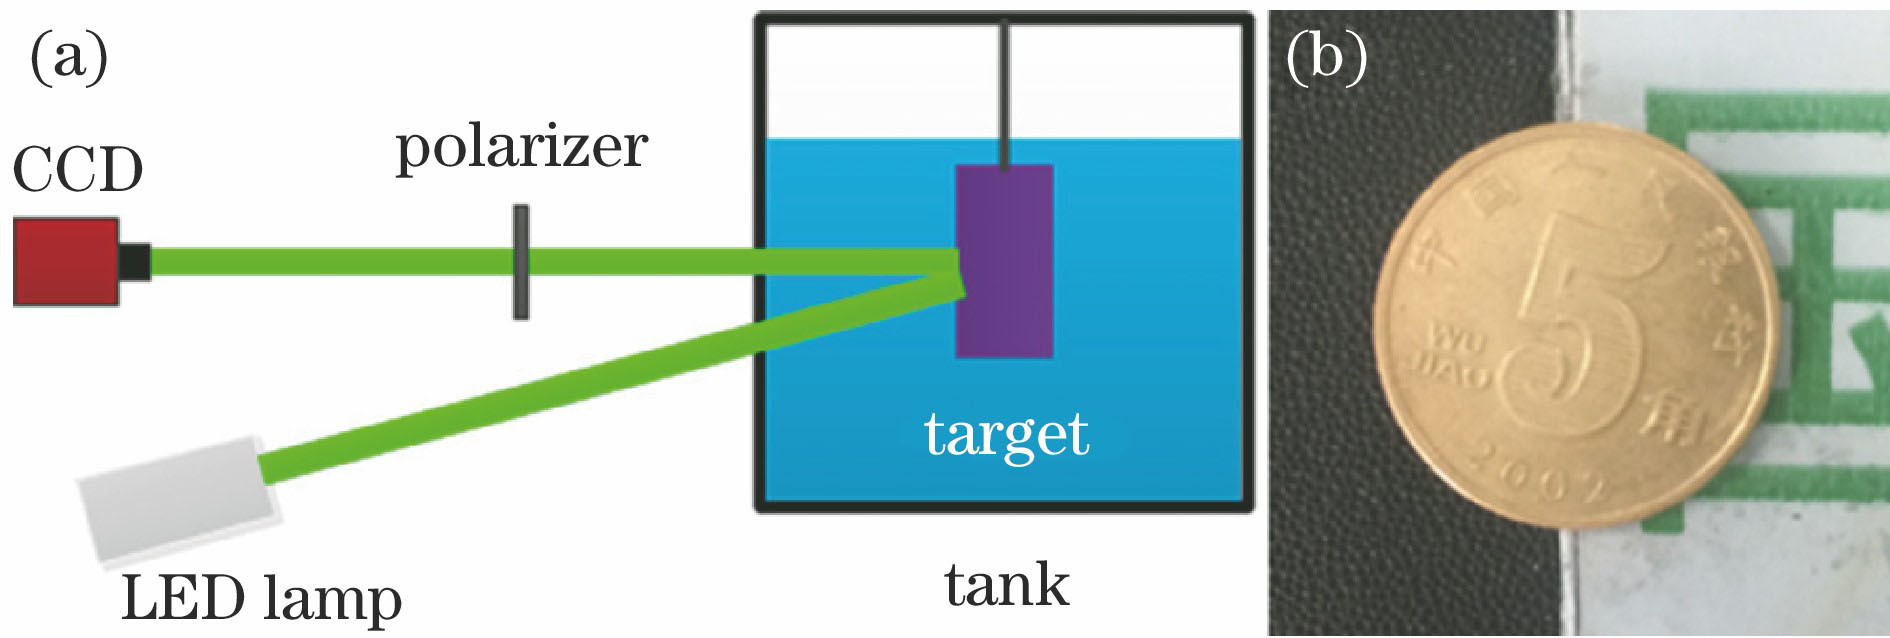 Experimental setup. (a) Schematic of experimental setup for underwater imaging; (b) the target of experiment